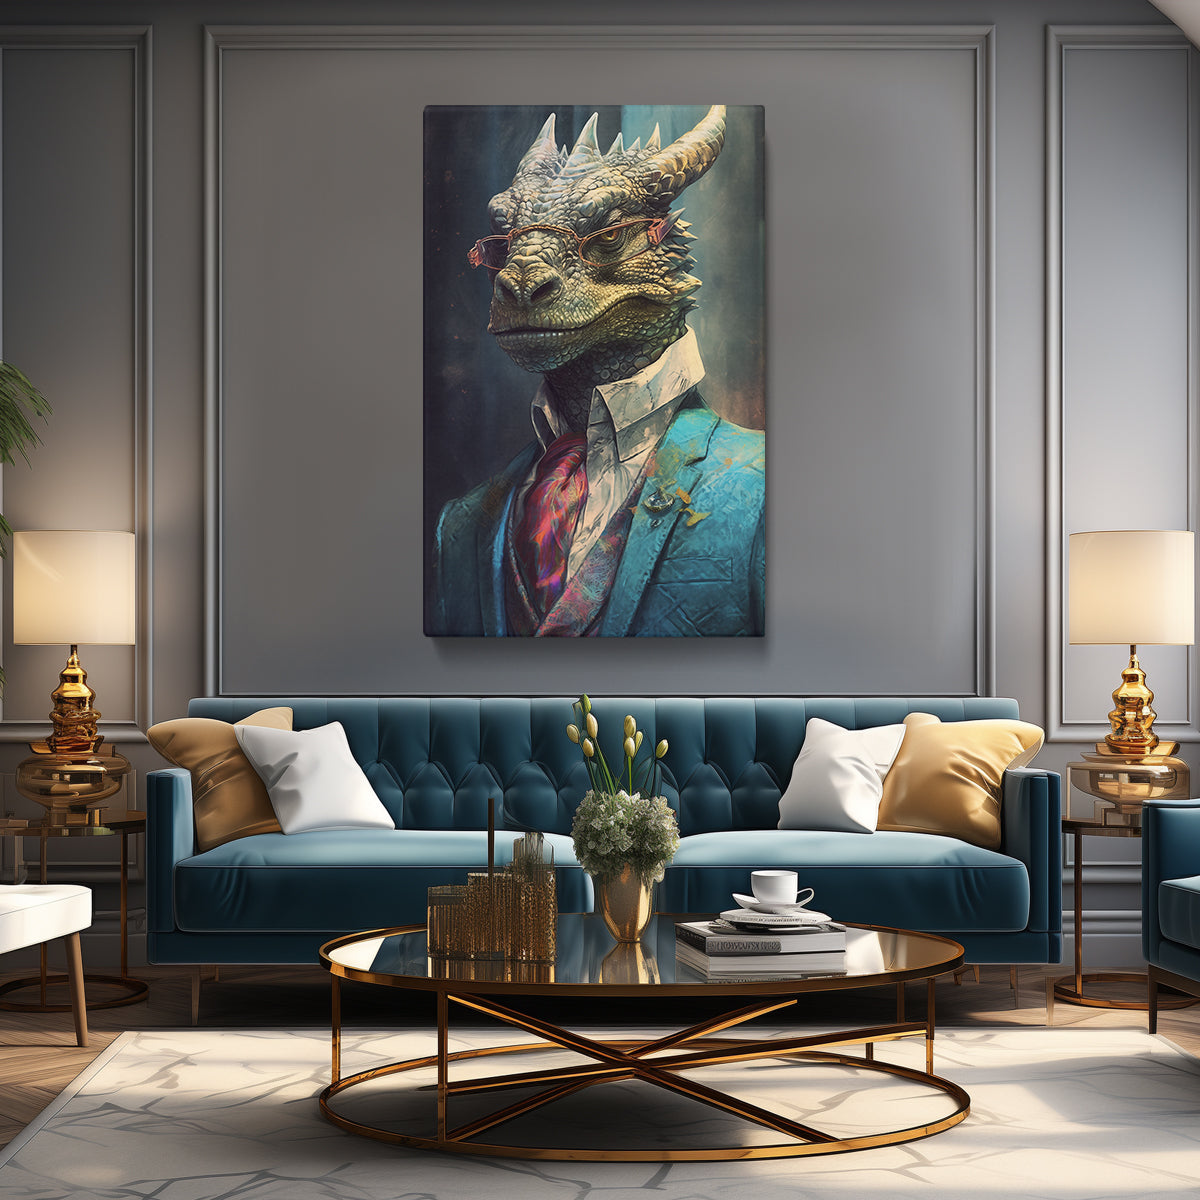 Chic Dragon in Suit Canvas Prints Artesty 1 Panel 16"x24" 